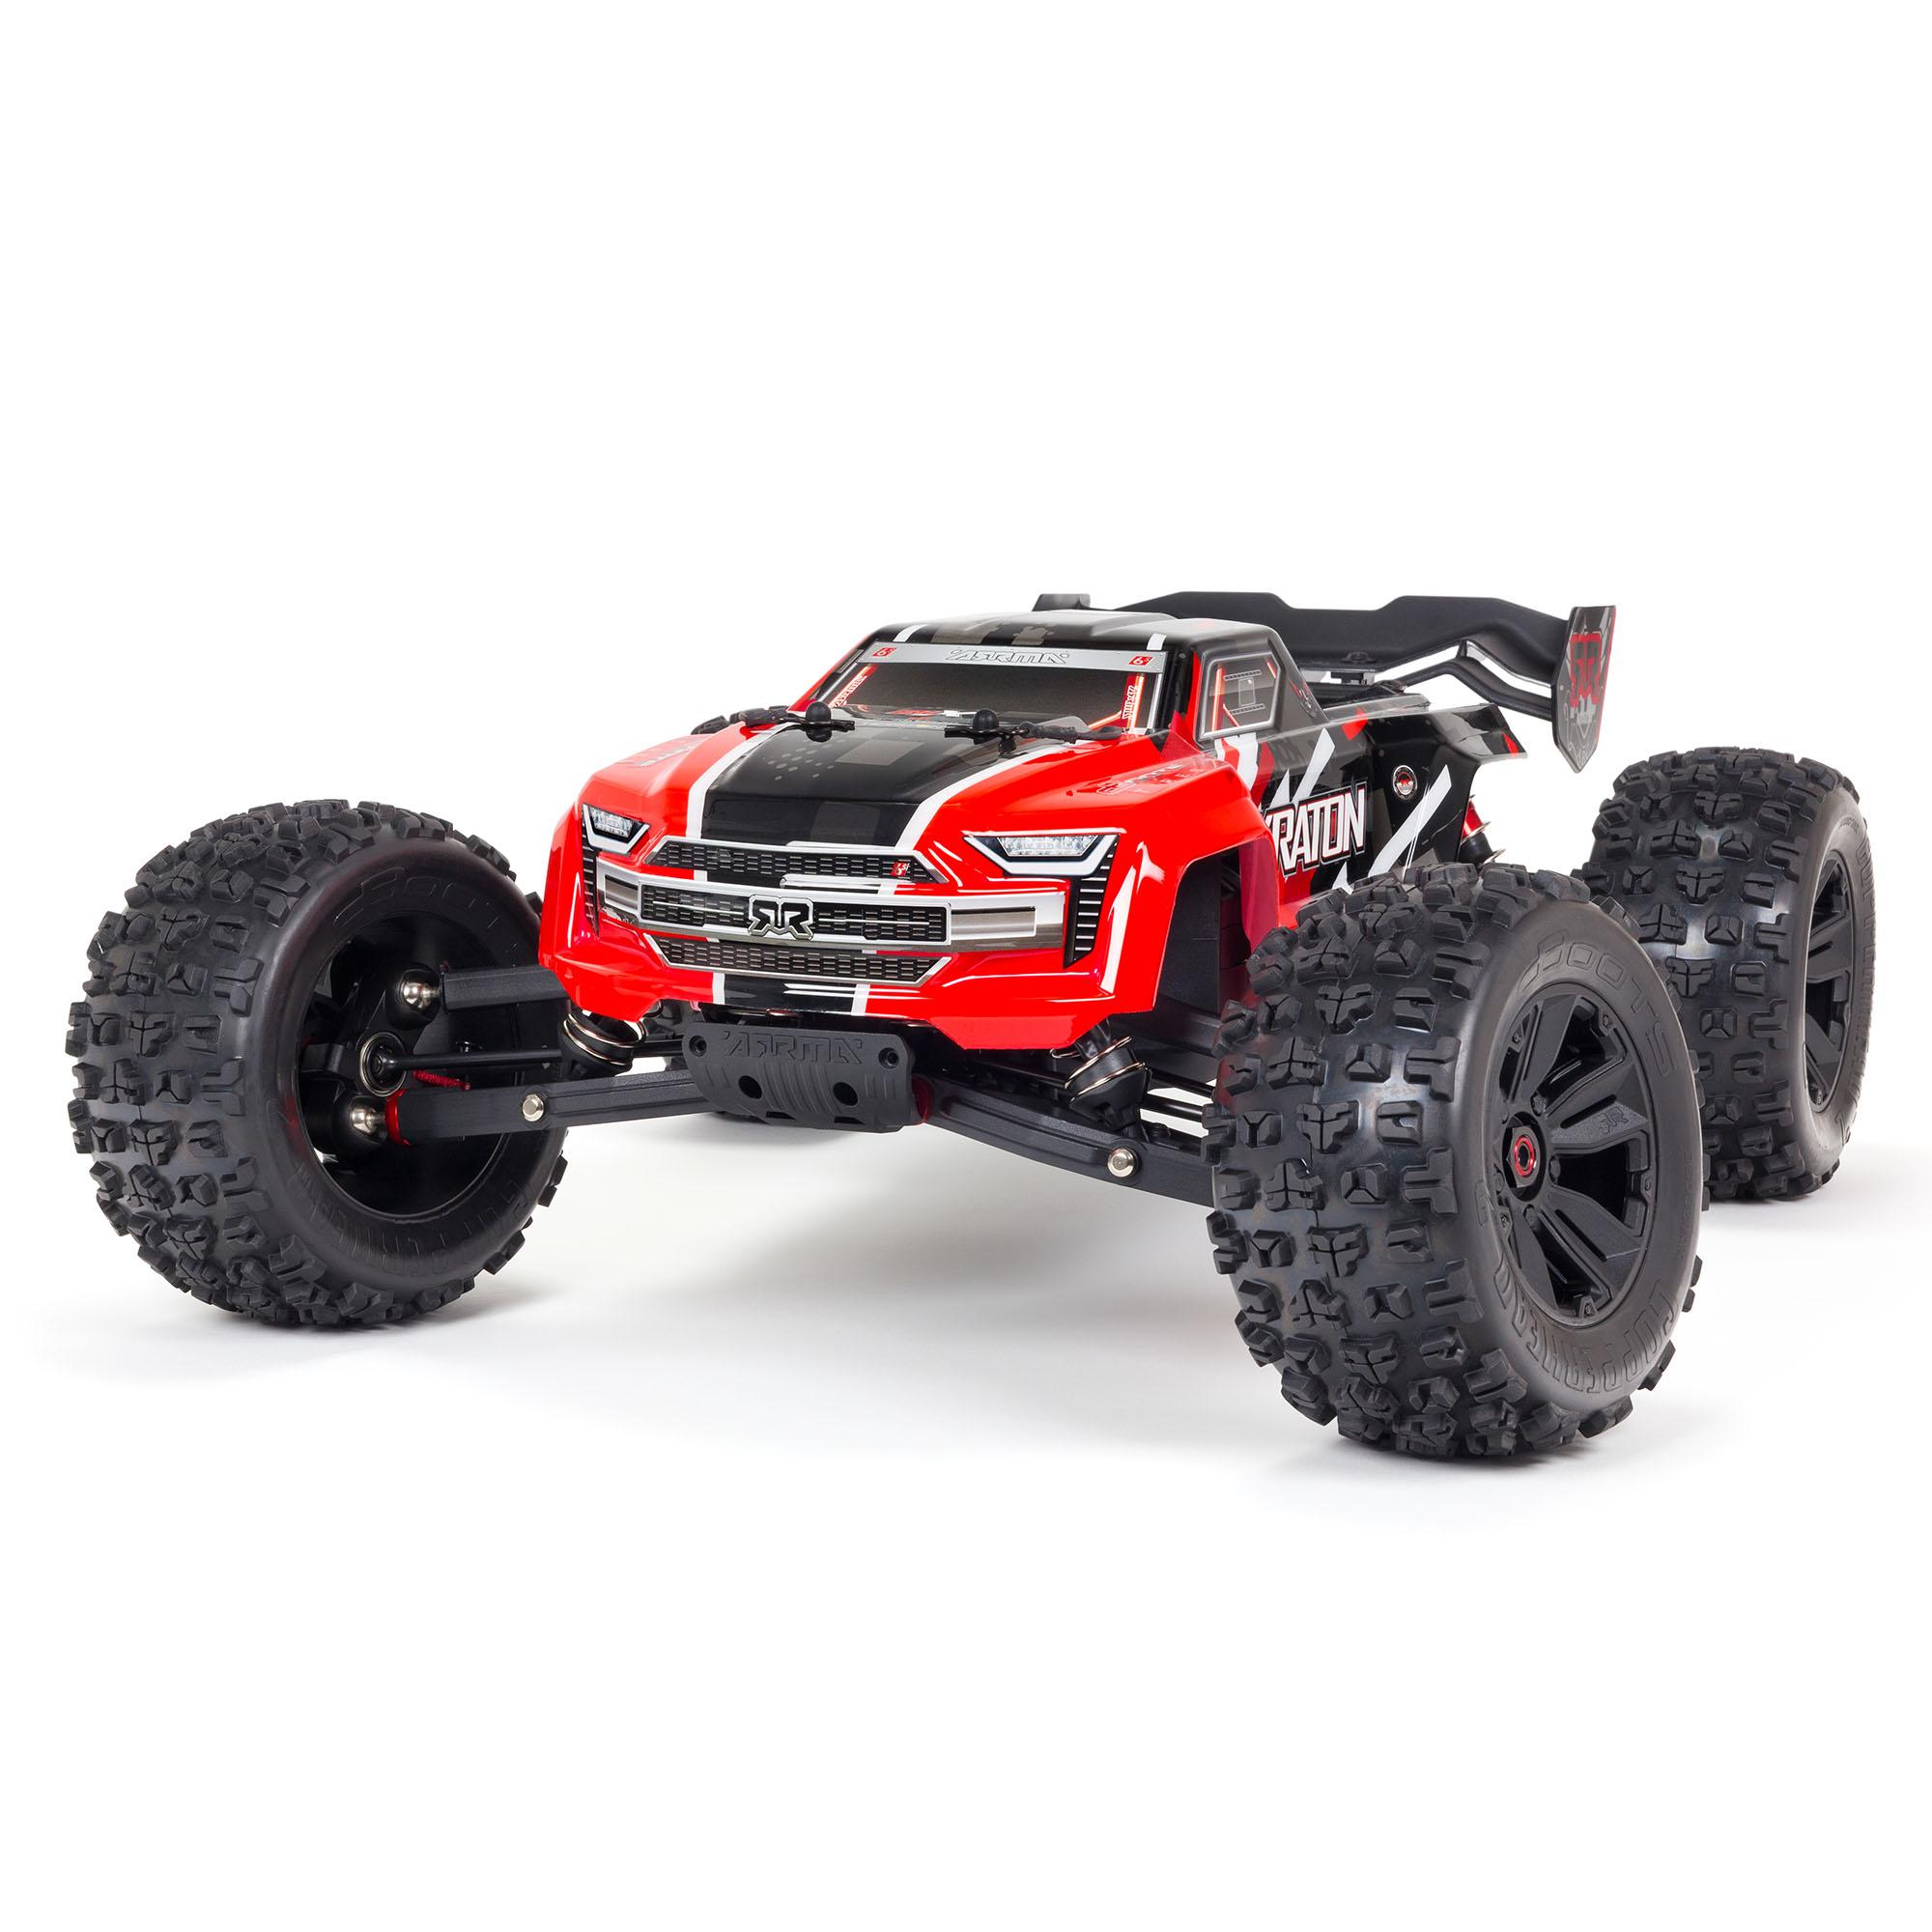 1/8 Scale Rc: High Performance 1/8 Scale RC Models: Top Speeds, Terrain Handling, and Responsive Controls